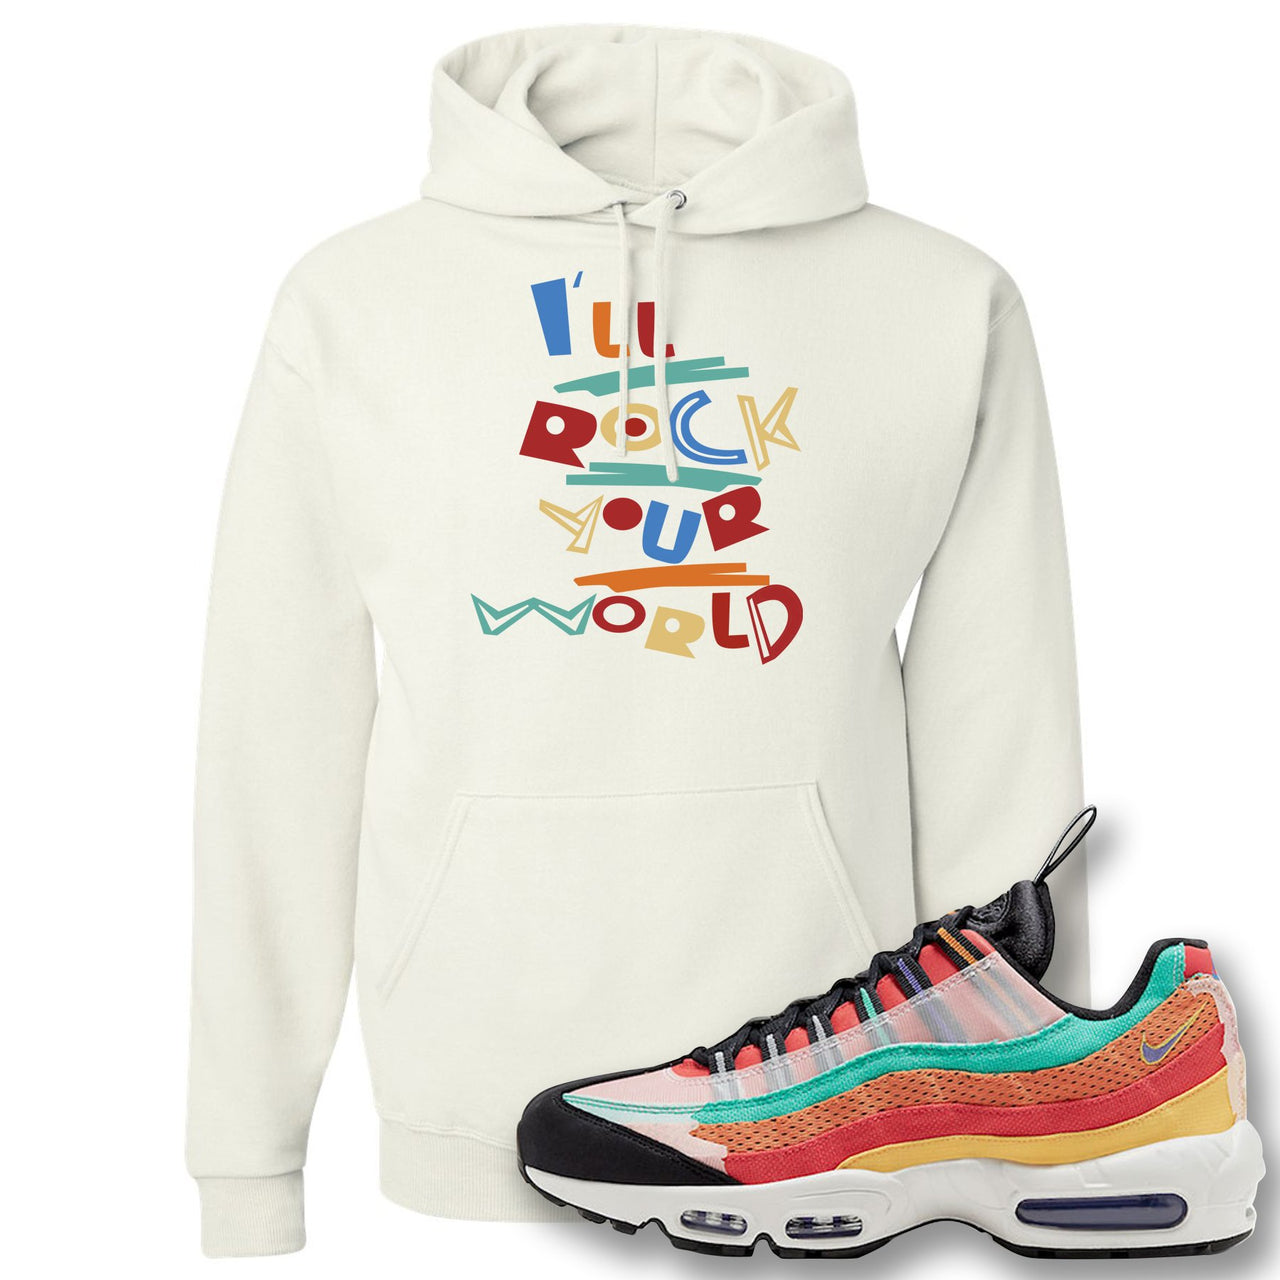 Air Max 95 Black History Month Sneaker White Pullover Hoodie | Hoodie to match Nike Air Max 95 Black History Month Shoes | I'll Rock Your World